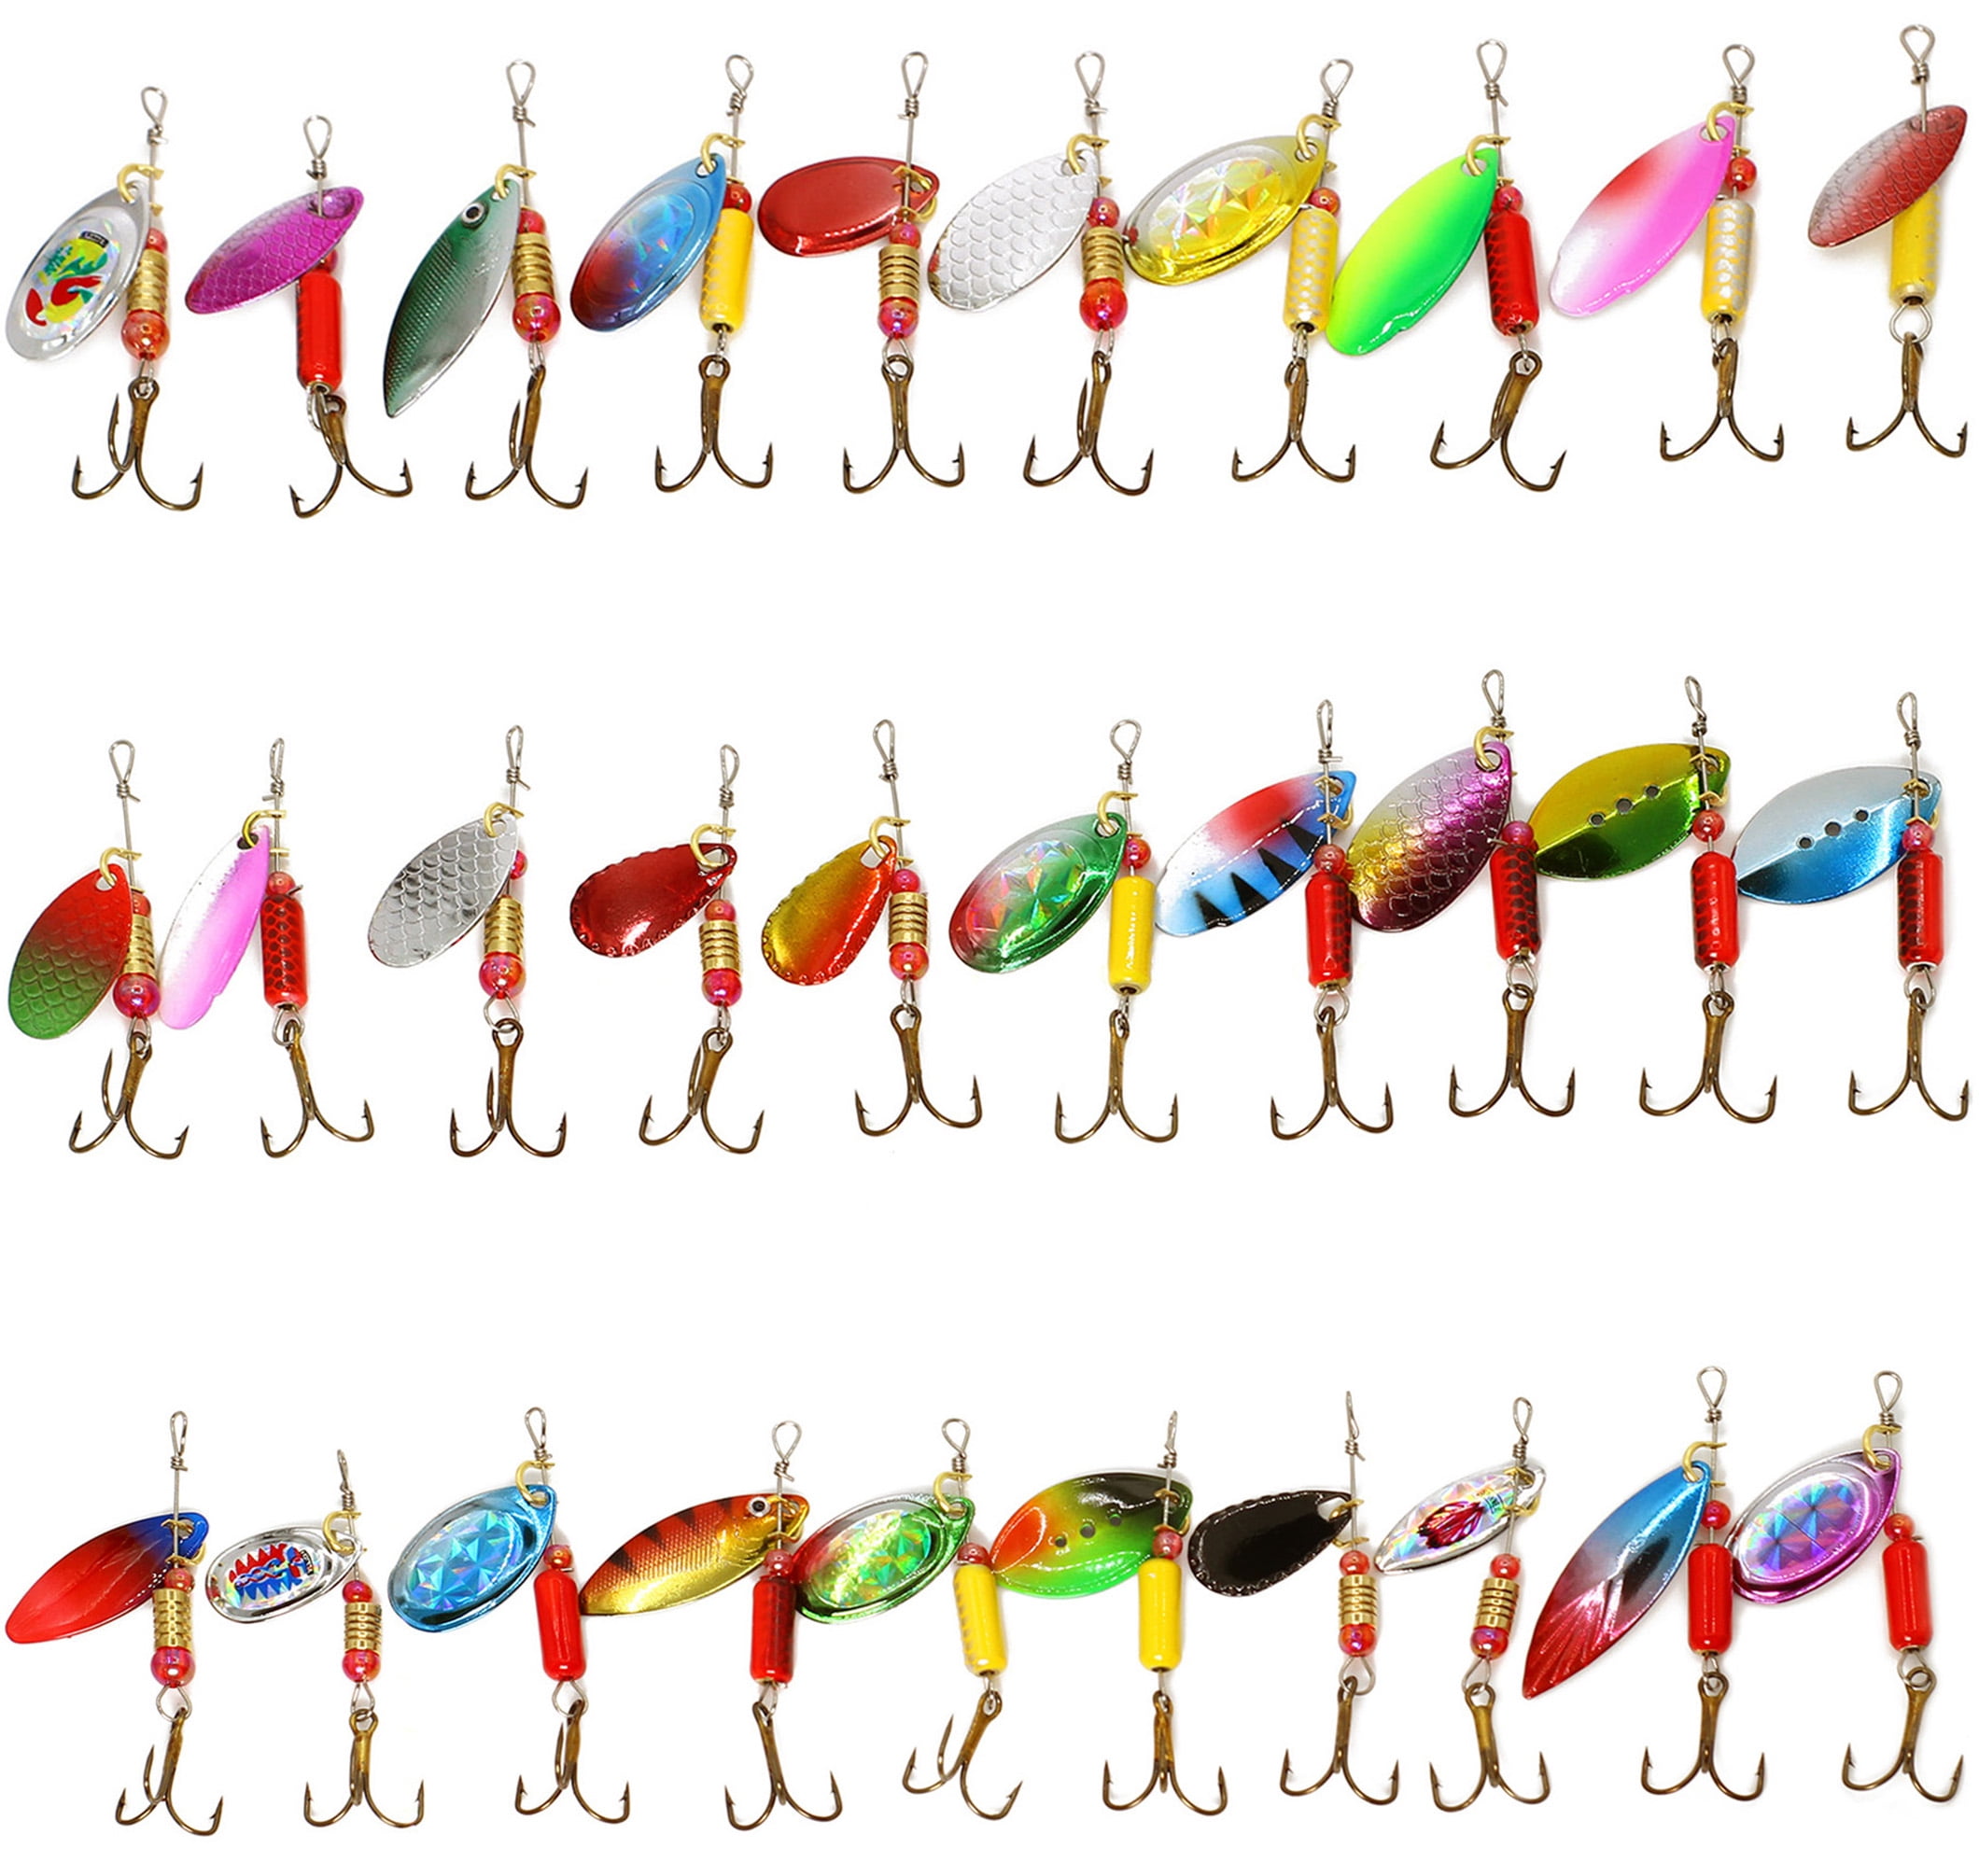 Details about   Lot of 30 Trout Spoon Metal Fishing Lures Spinner Baits Bass Tackle Colorful